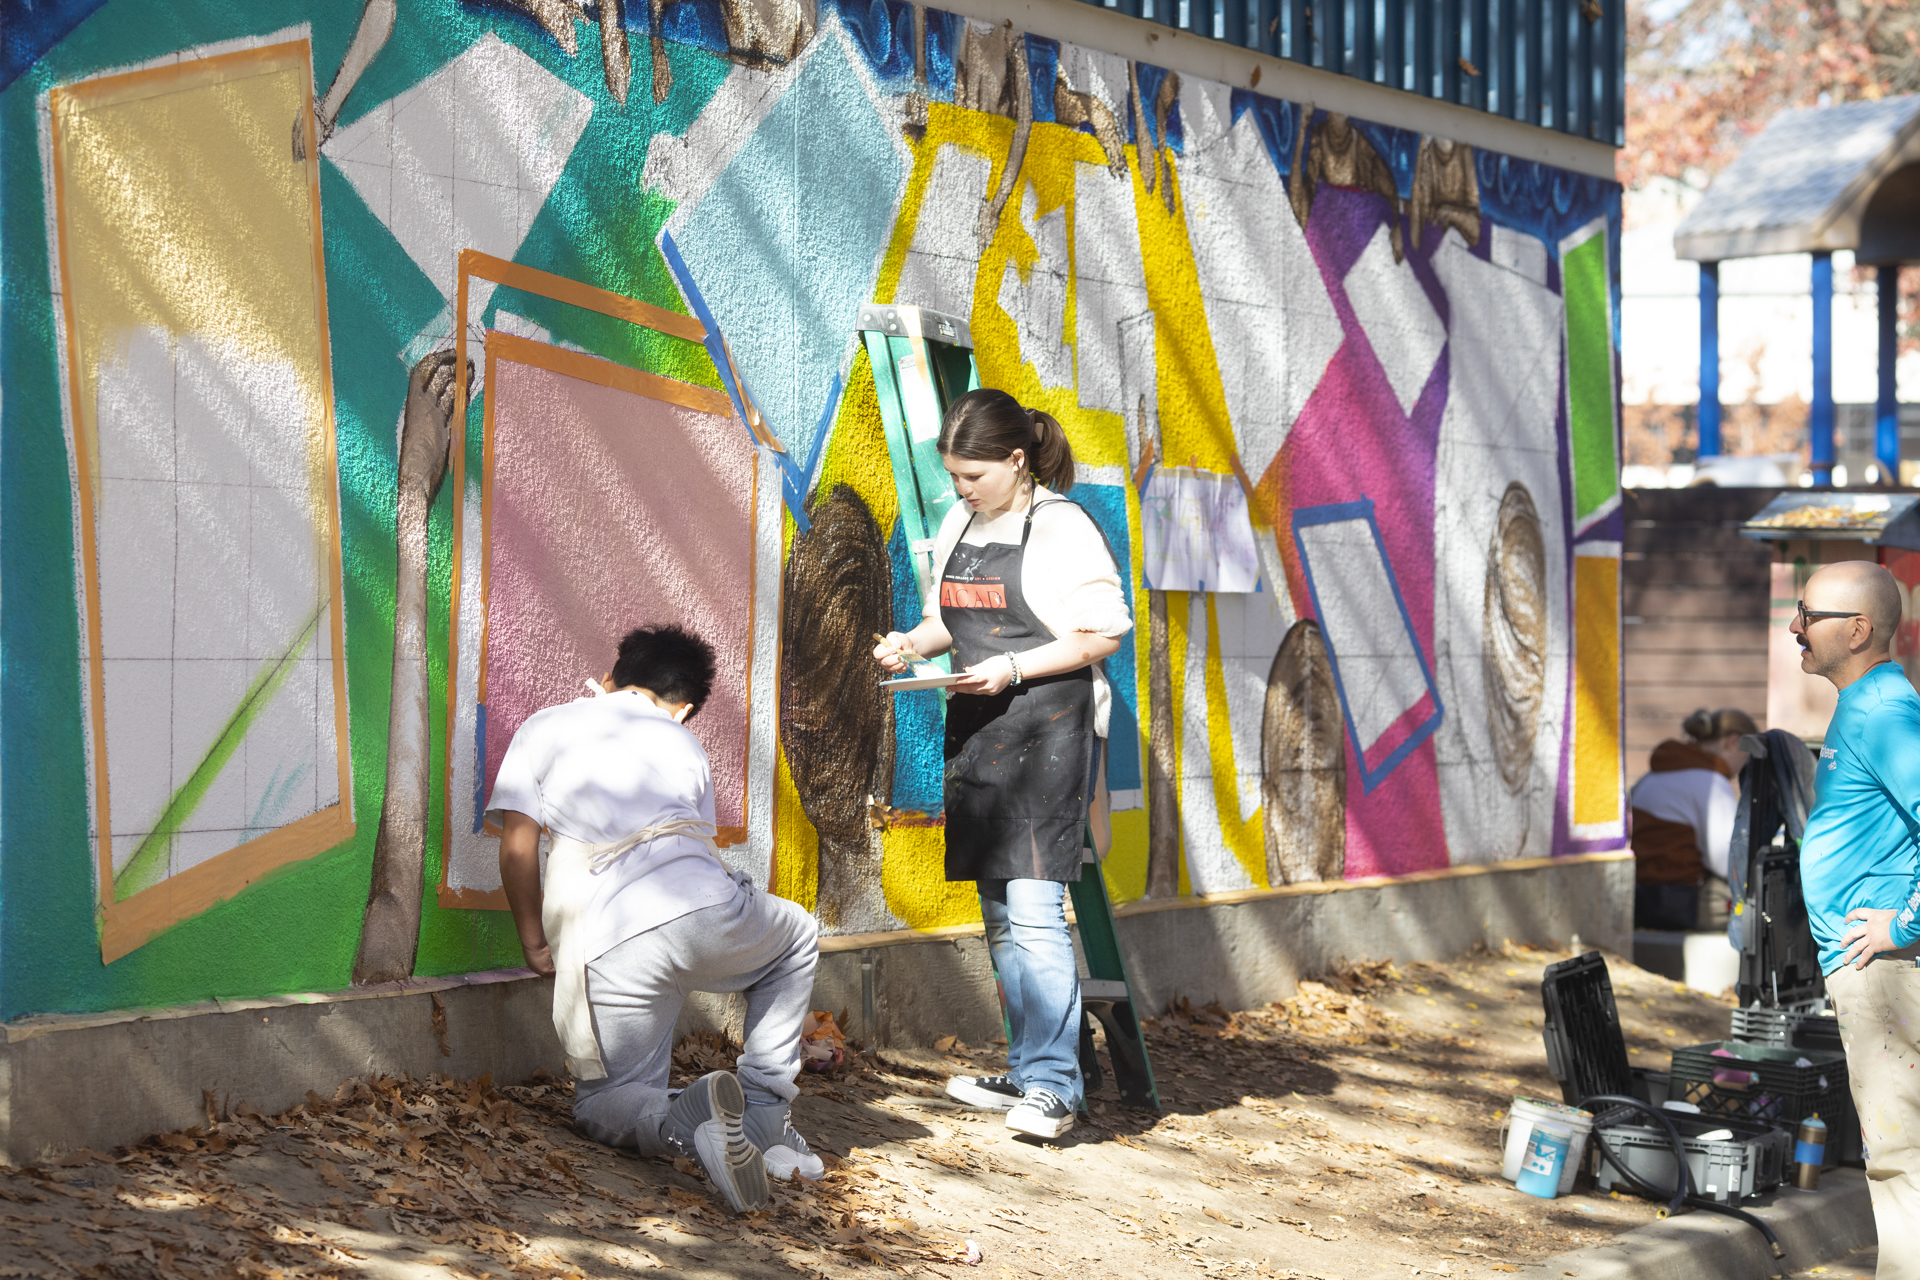 Two Washington Elementary students paint an outdoor mural as Sac State professor Luis Garcia watches.